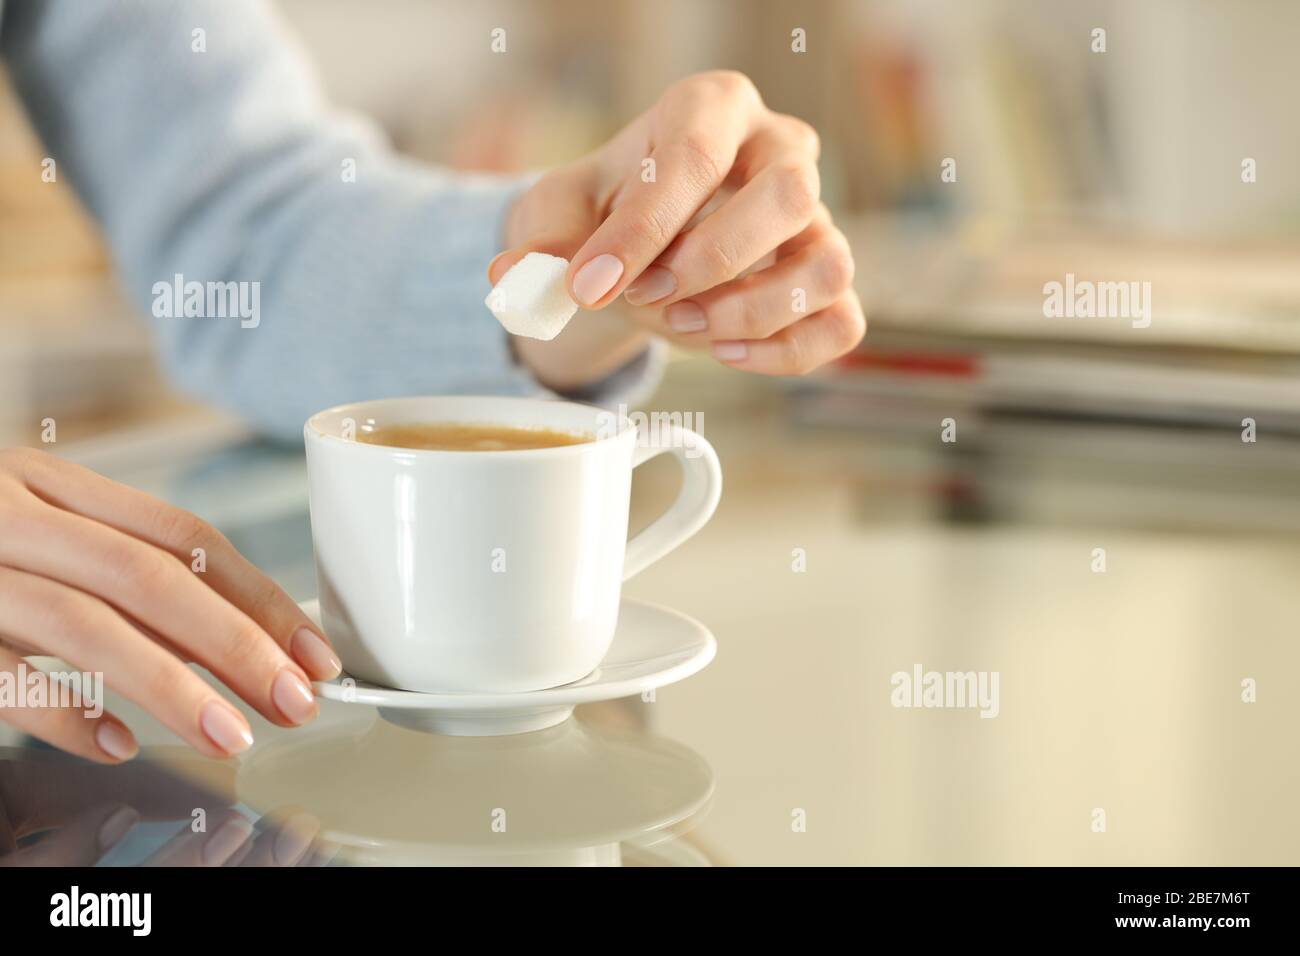 Close up of woman hand holding sugar cube over a coffee cup on a desk at home Stock Photo